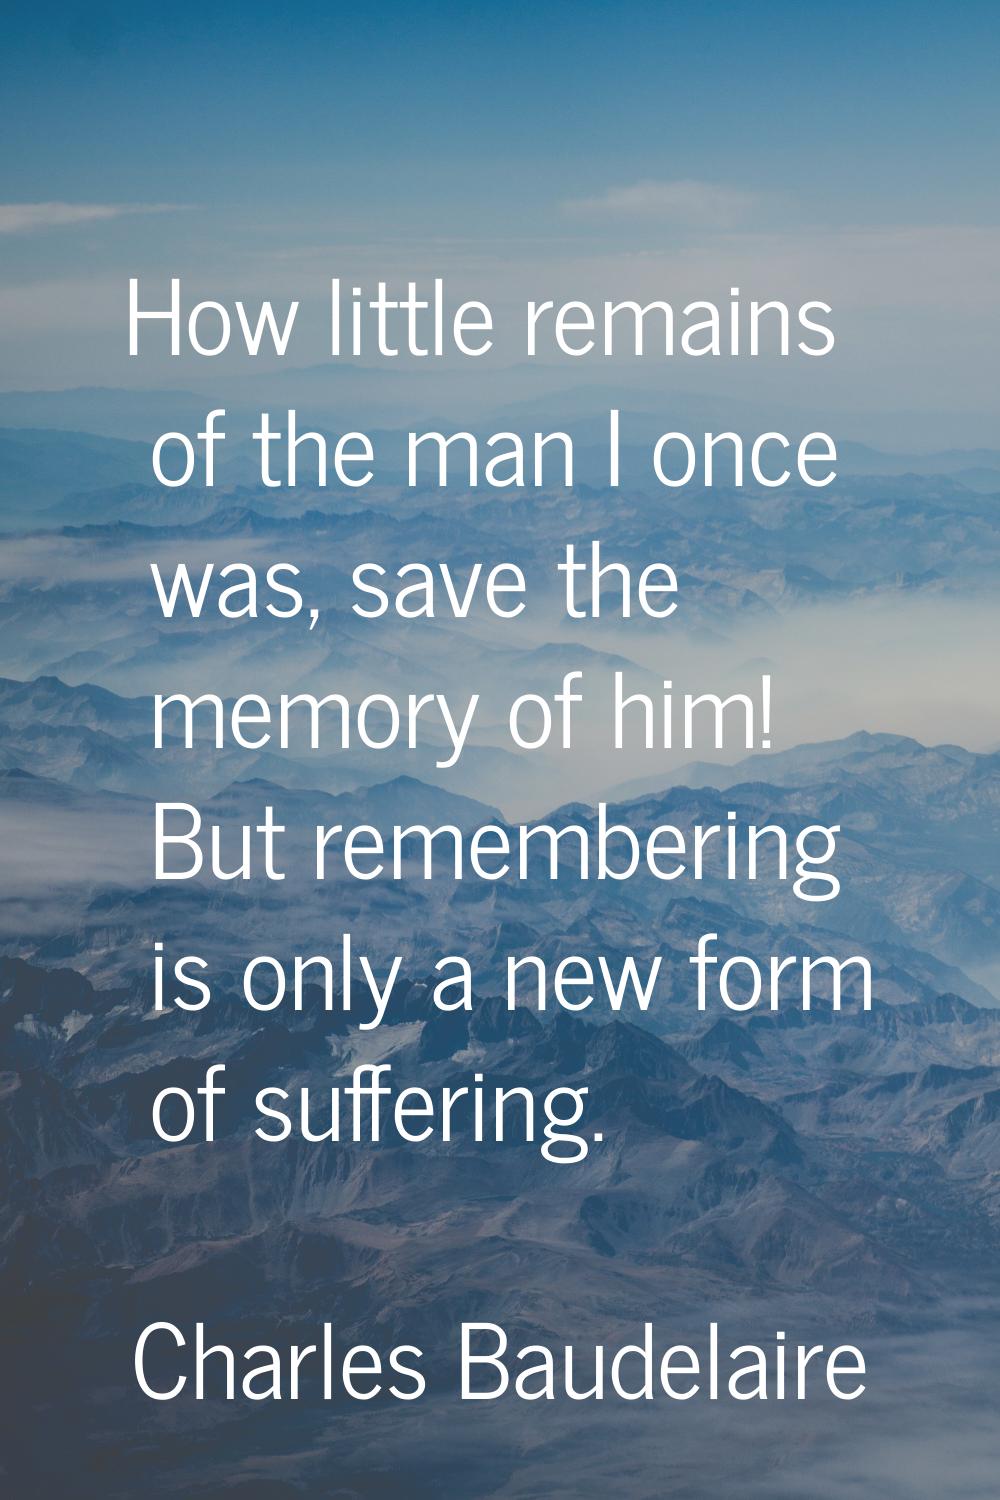 How little remains of the man I once was, save the memory of him! But remembering is only a new for